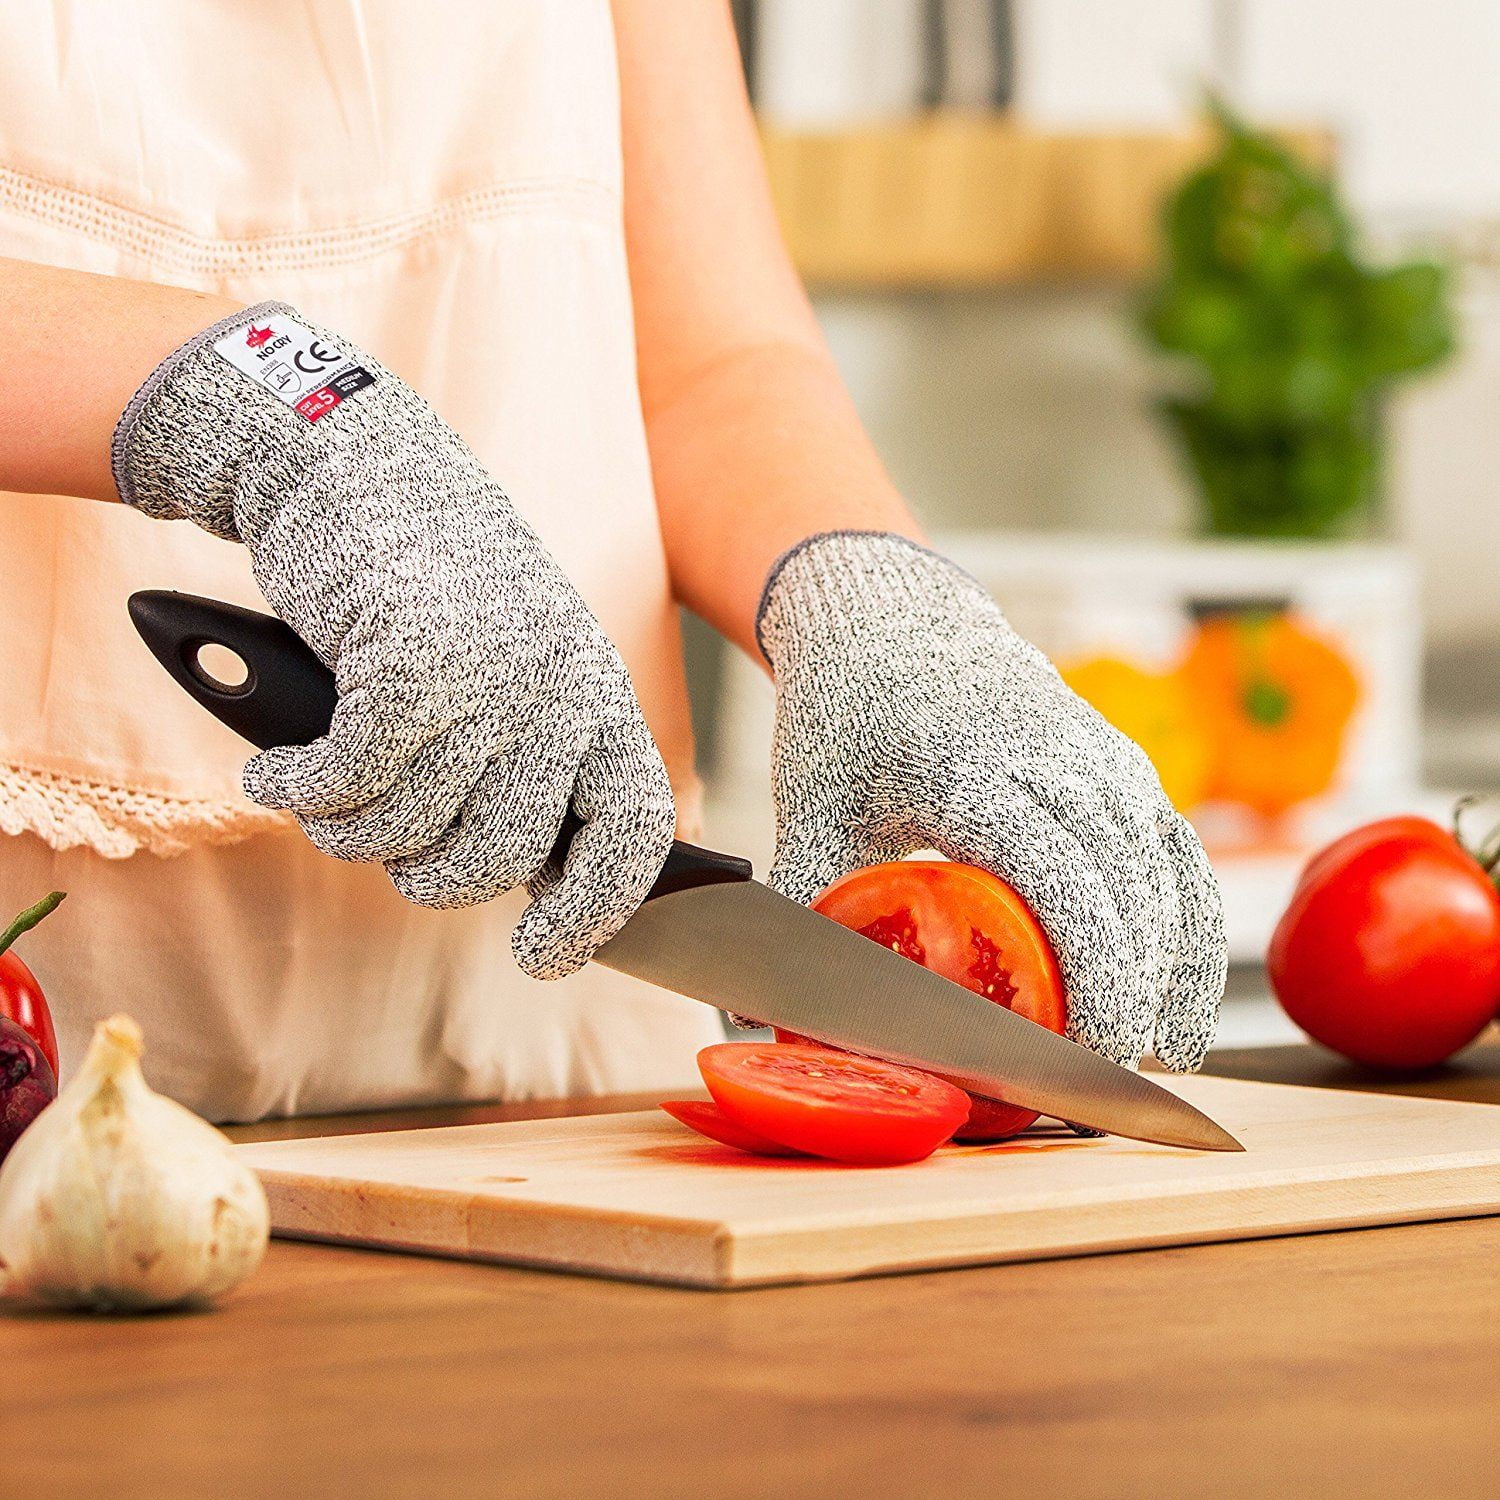 No Crying in the Kitchen with NoCry Cut Resistant Gloves - Food Corner